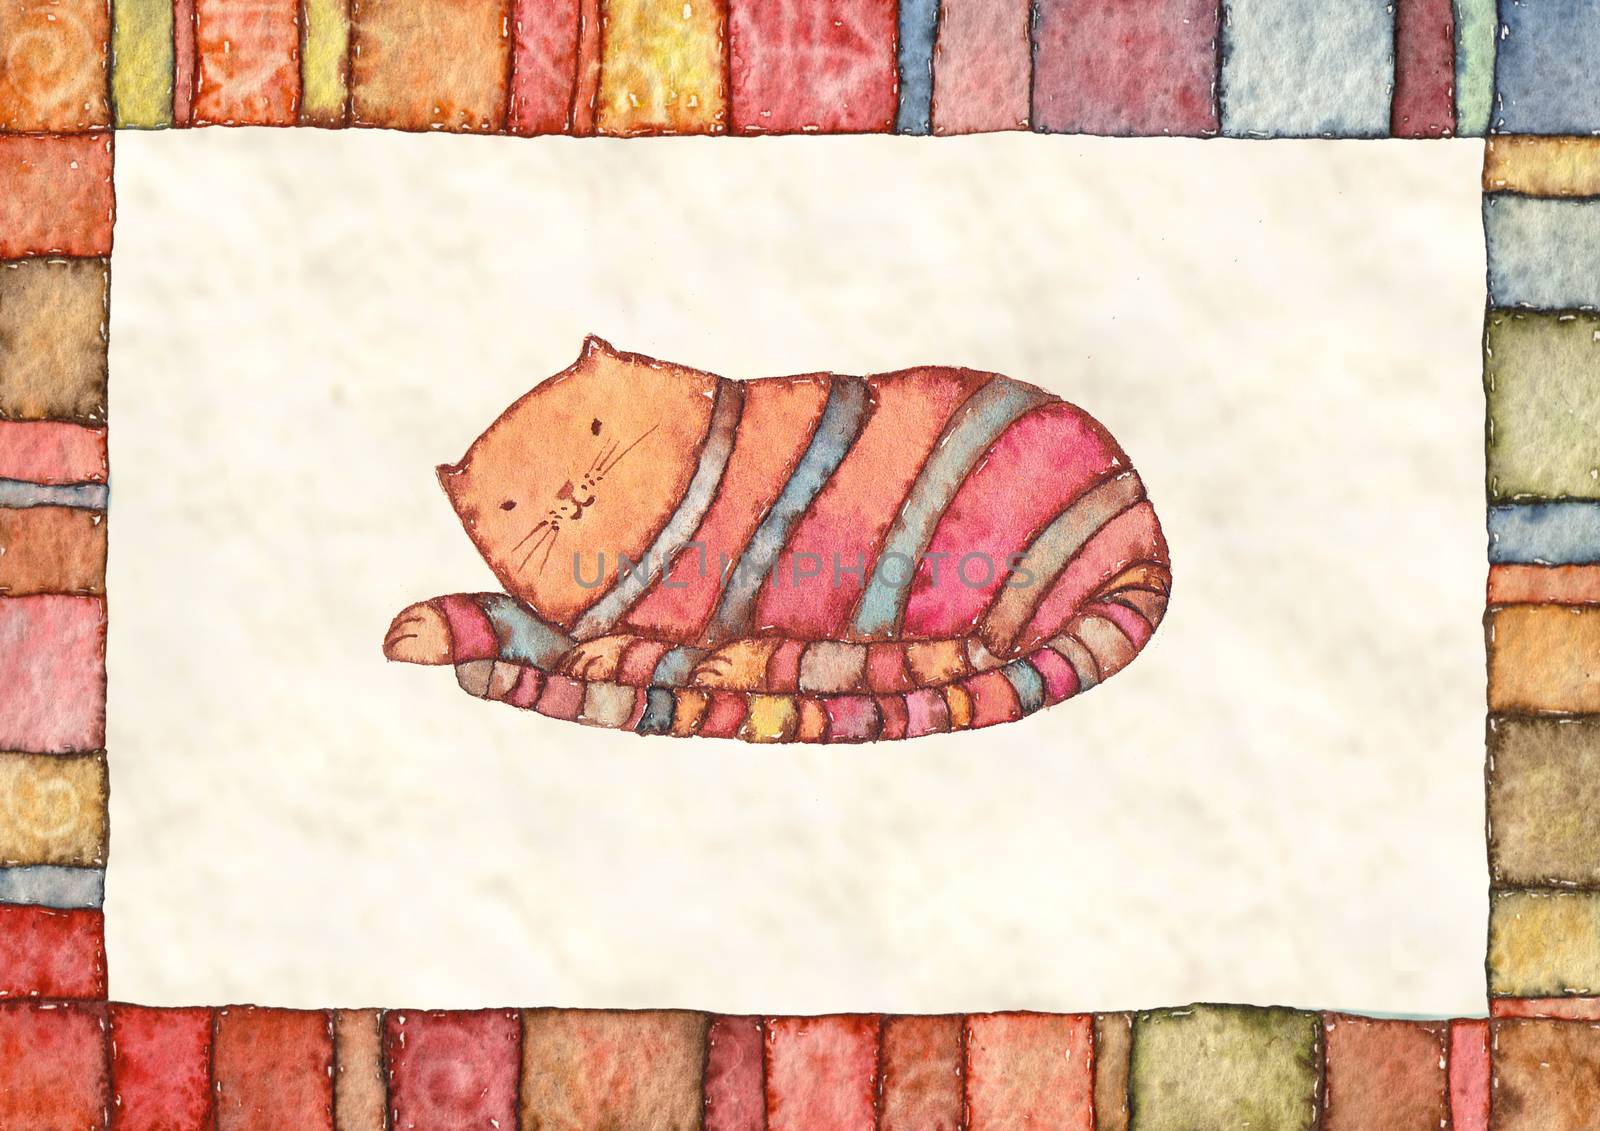 Striped cat, watercolor illustration by vimasi